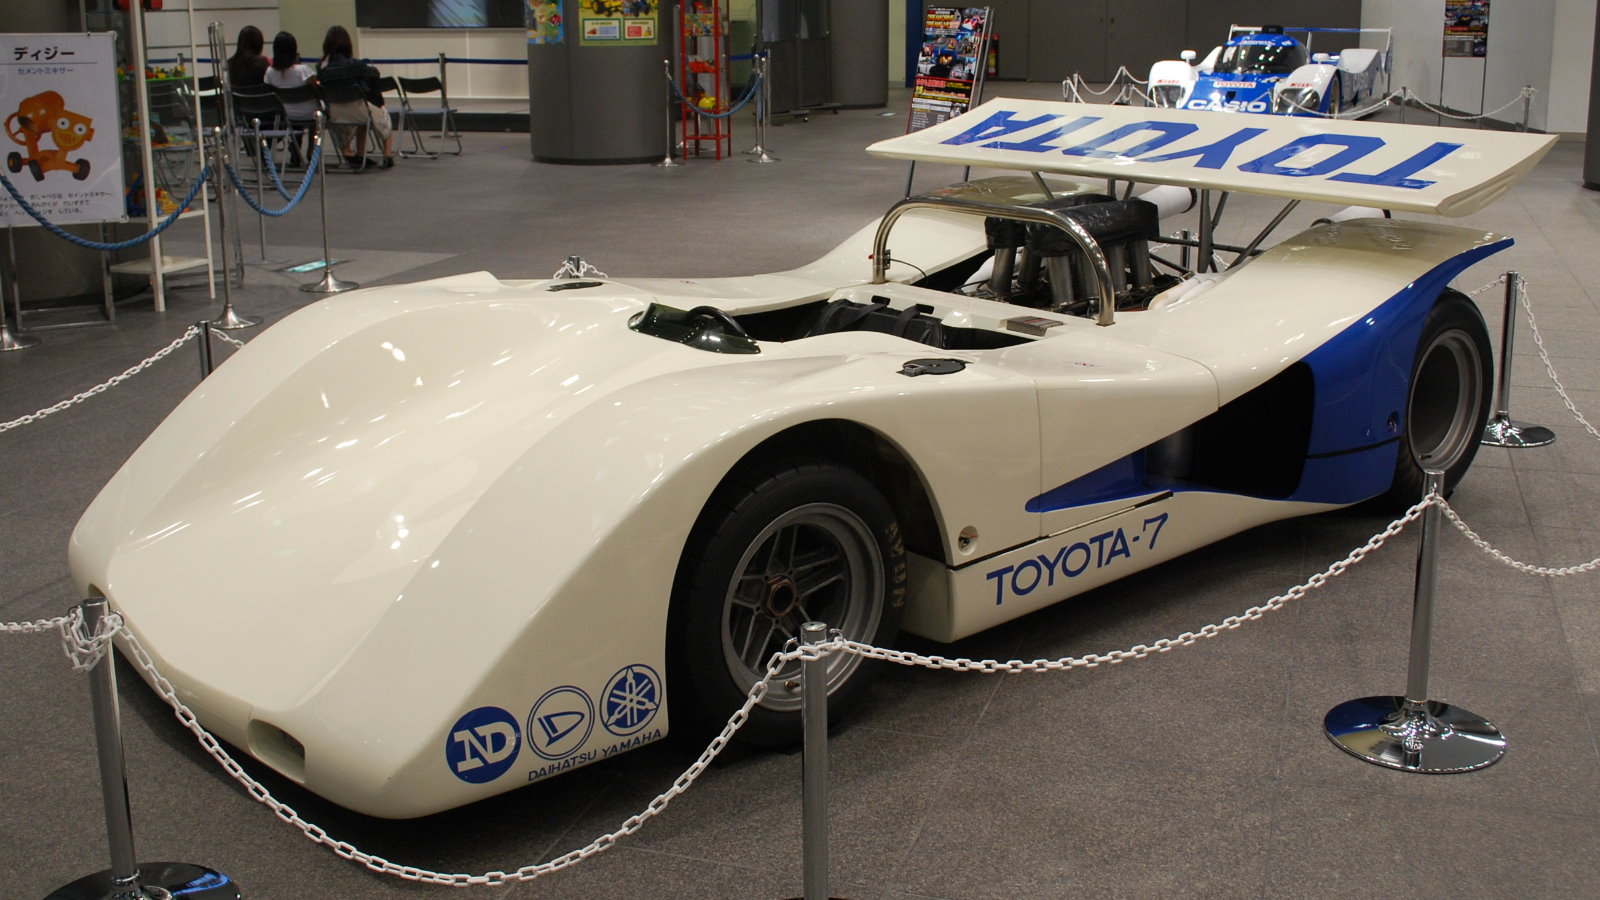 Toyota 7 Pics, Vehicles Collection